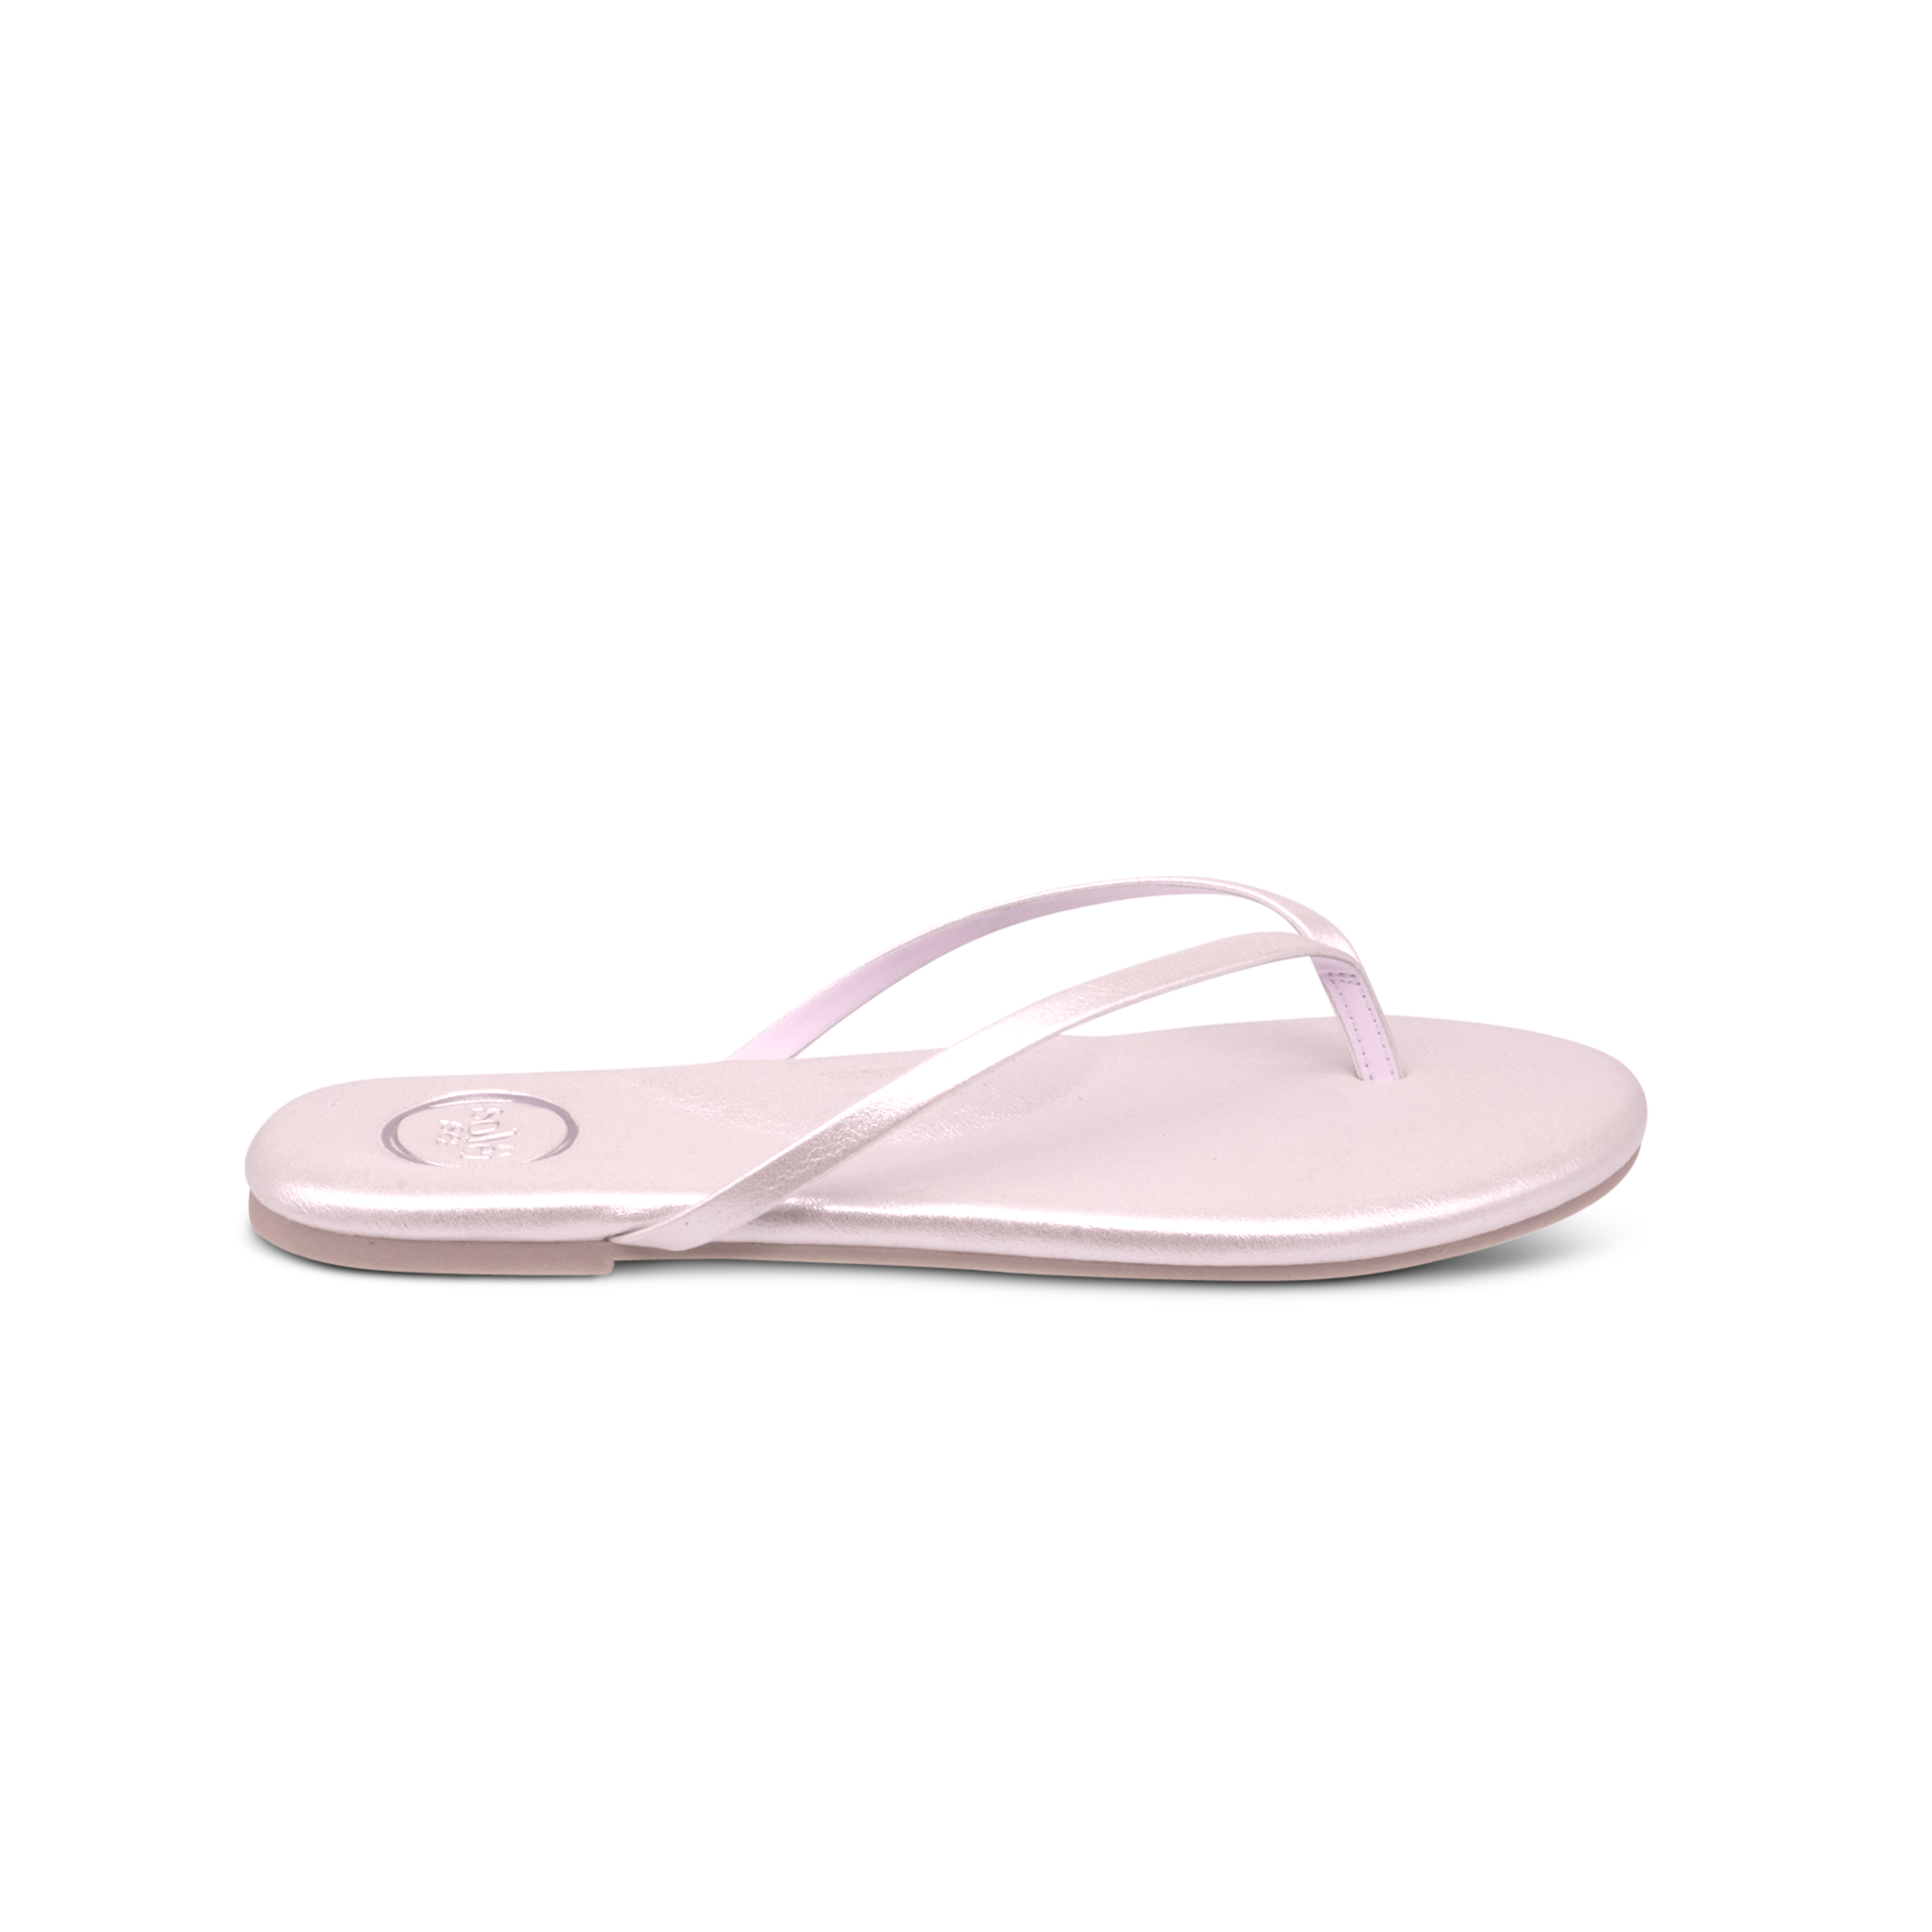 beautiful shiny Indie flip flop in icy color